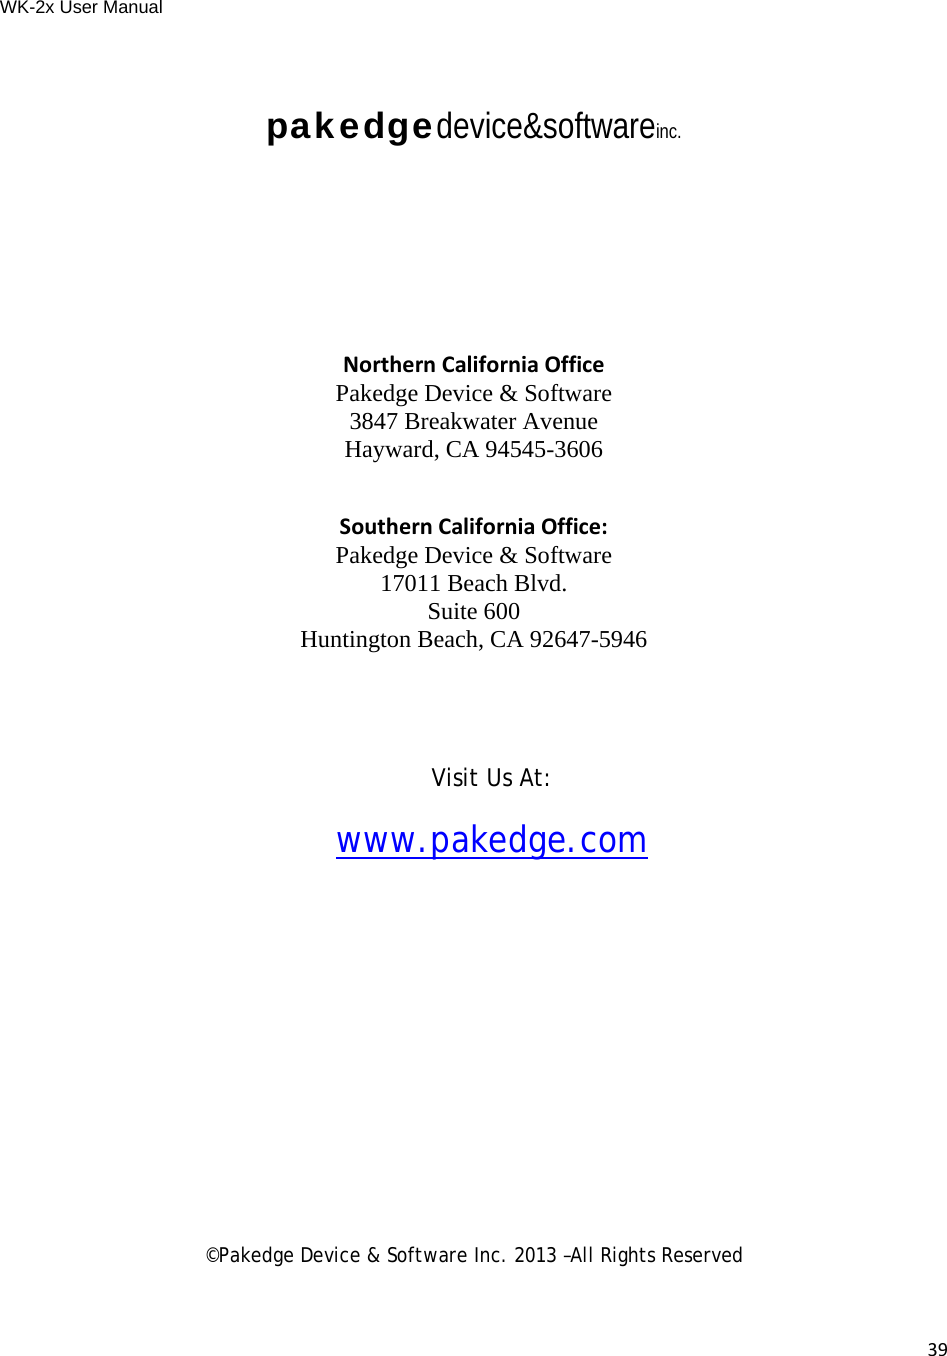 WK-2x User Manual 39pakedgedevice&amp;softwareinc.     NorthernCaliforniaOffice Pakedge Device &amp; Software 3847 Breakwater Avenue Hayward, CA 94545-3606  SouthernCaliforniaOffice: Pakedge Device &amp; Software 17011 Beach Blvd. Suite 600 Huntington Beach, CA 92647-5946  Visit Us At:www.pakedge.com©Pakedge Device &amp; Software Inc. 2013 –All Rights Reserved